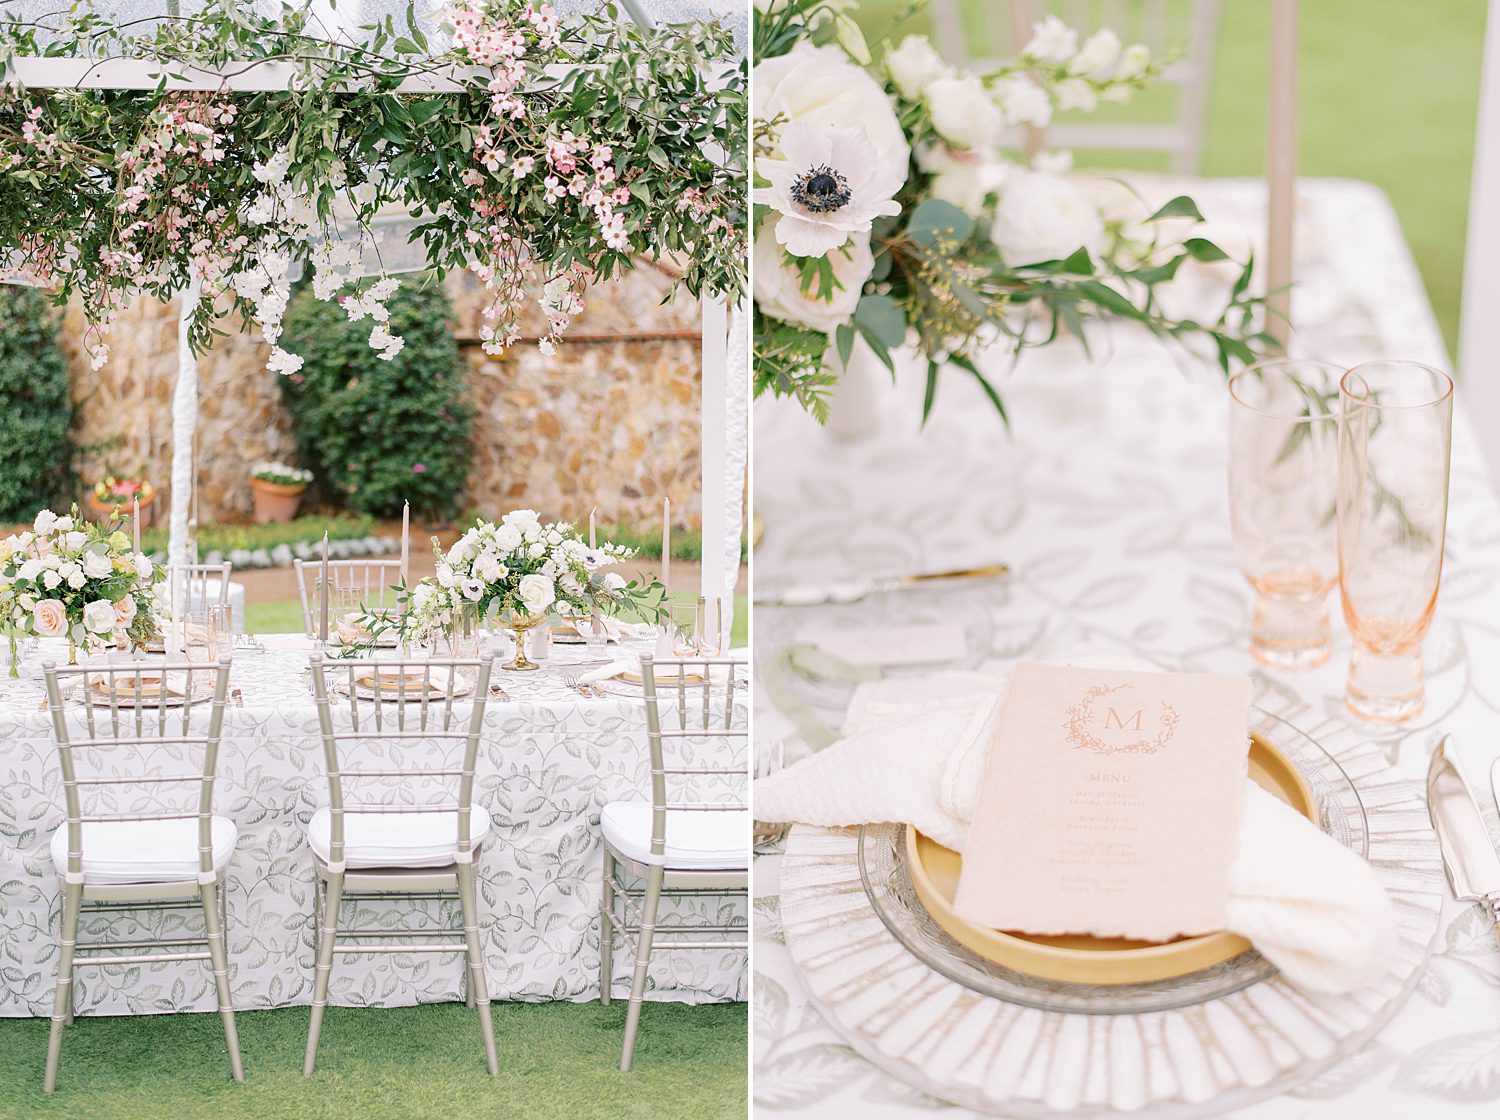 reception place settings for garden wedding at Bella Collina